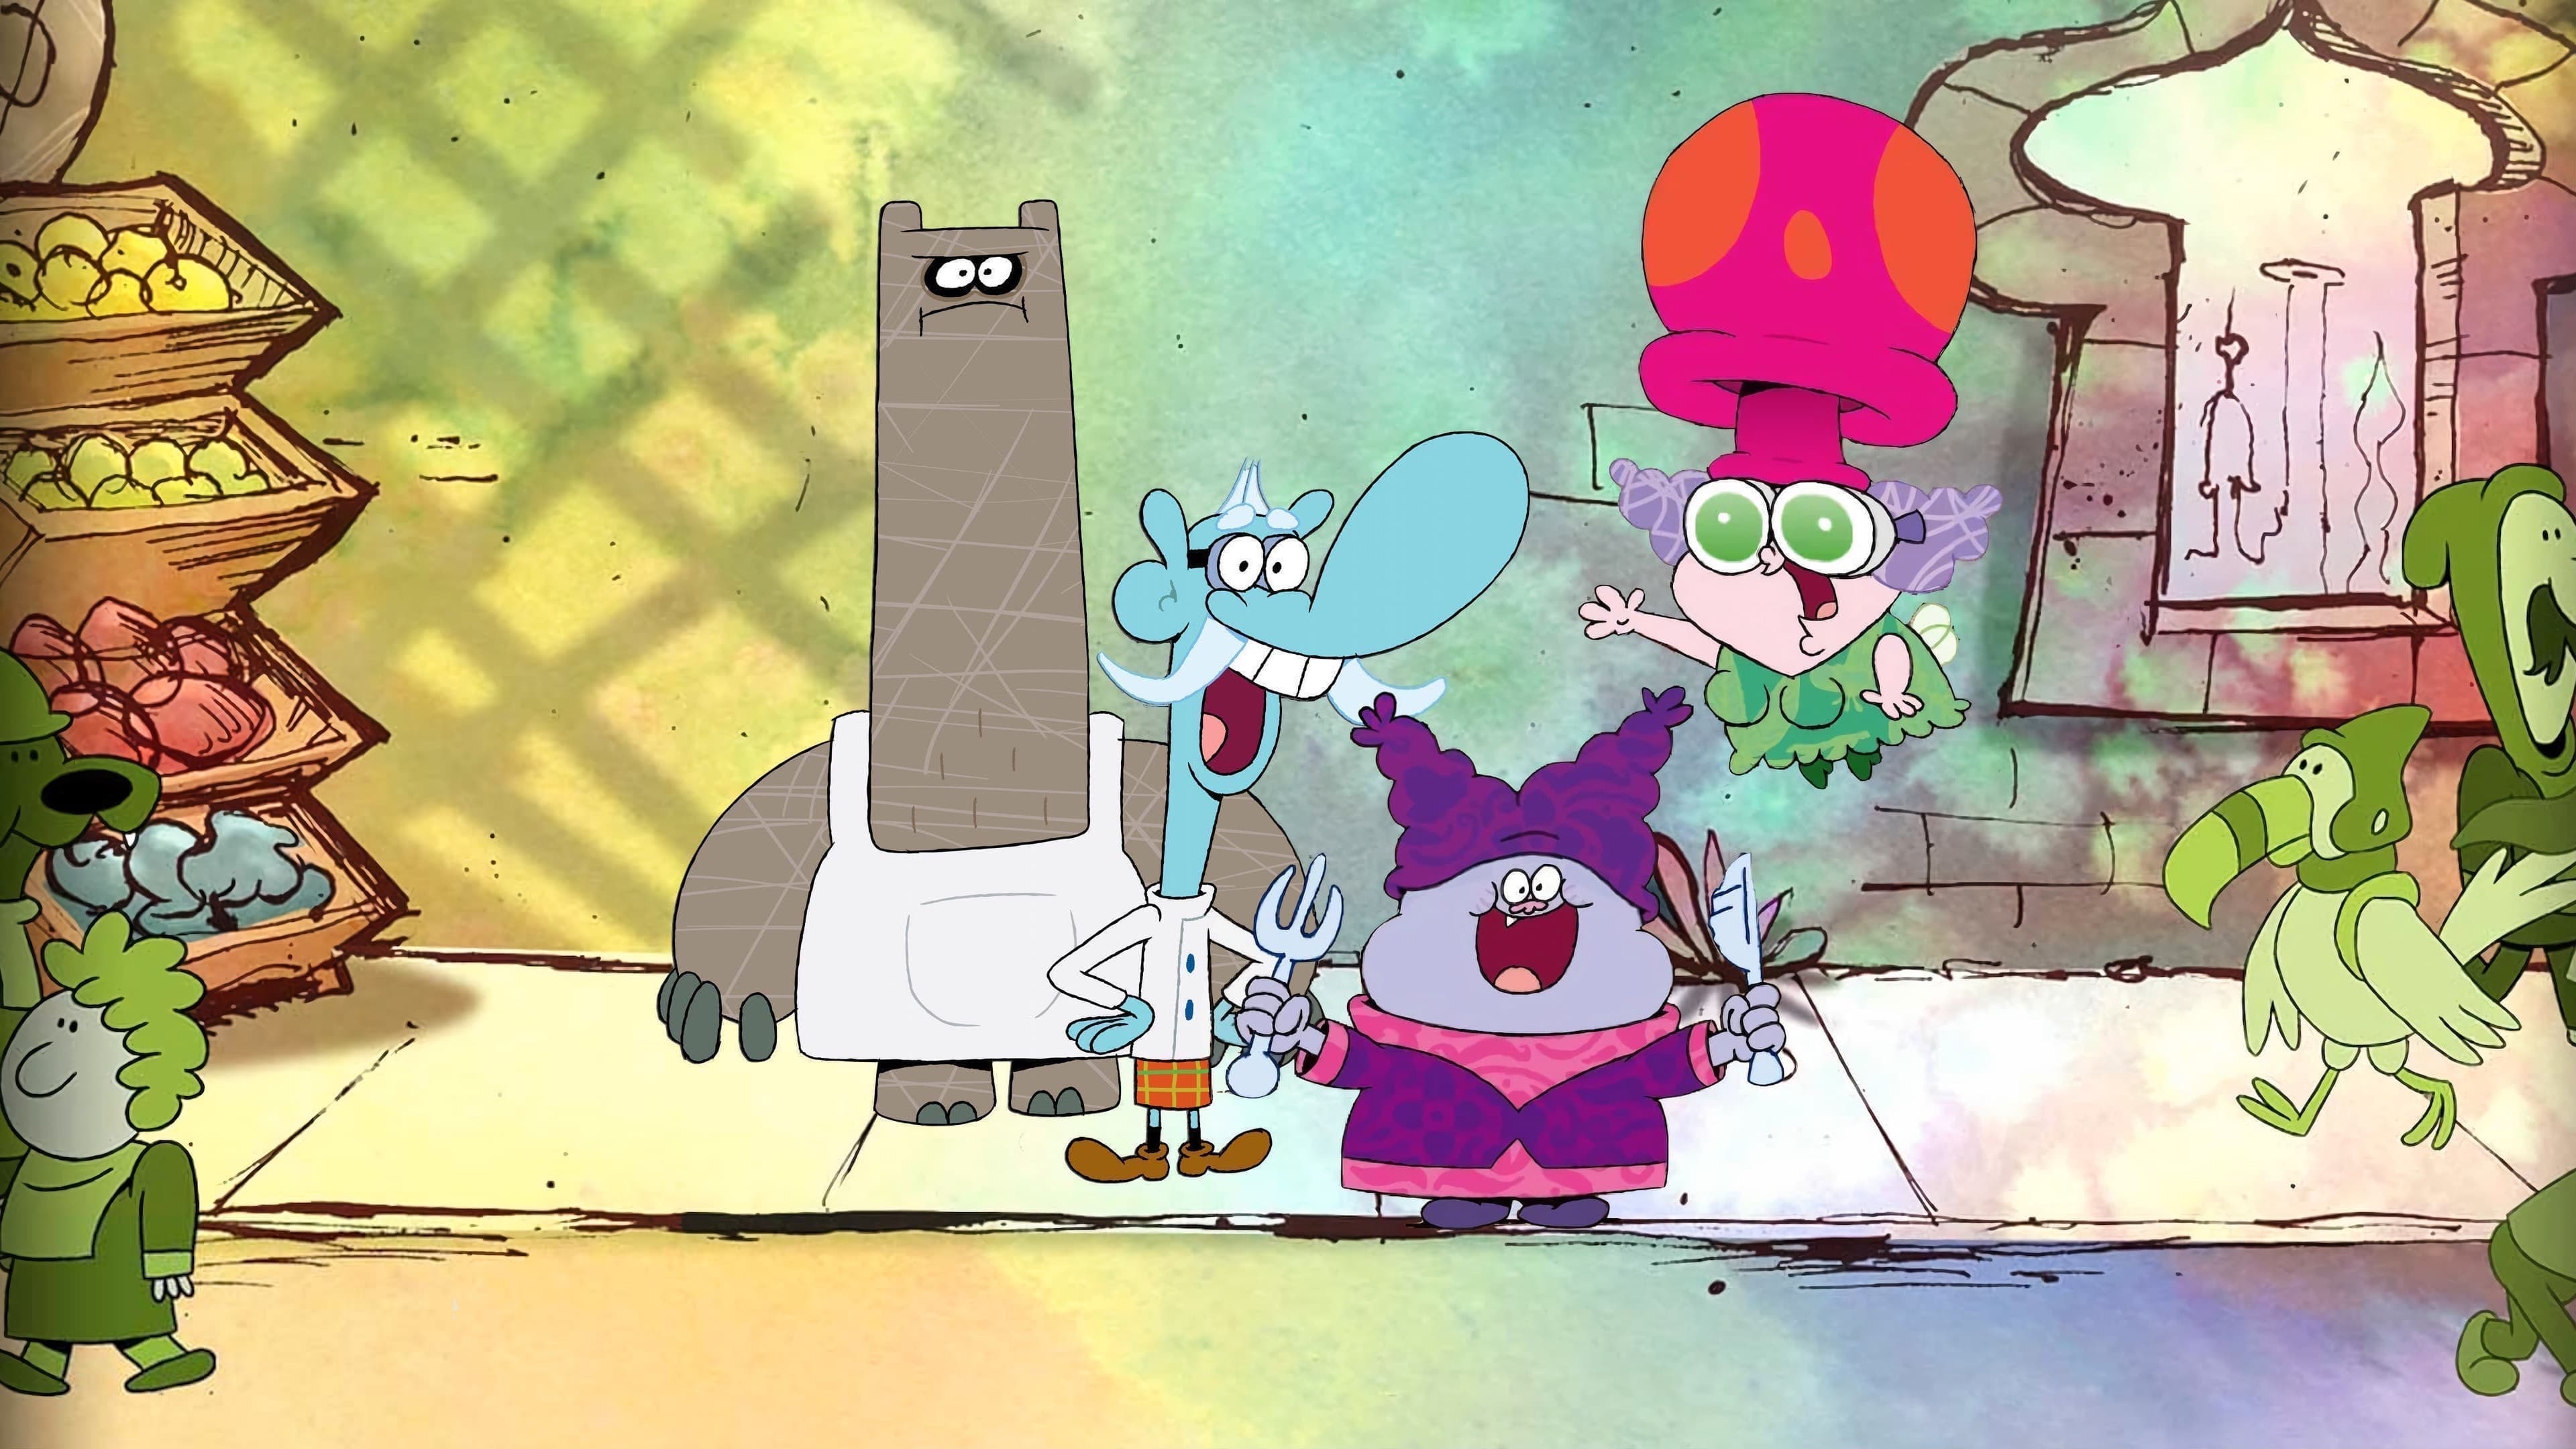 Chowder Wallpapers